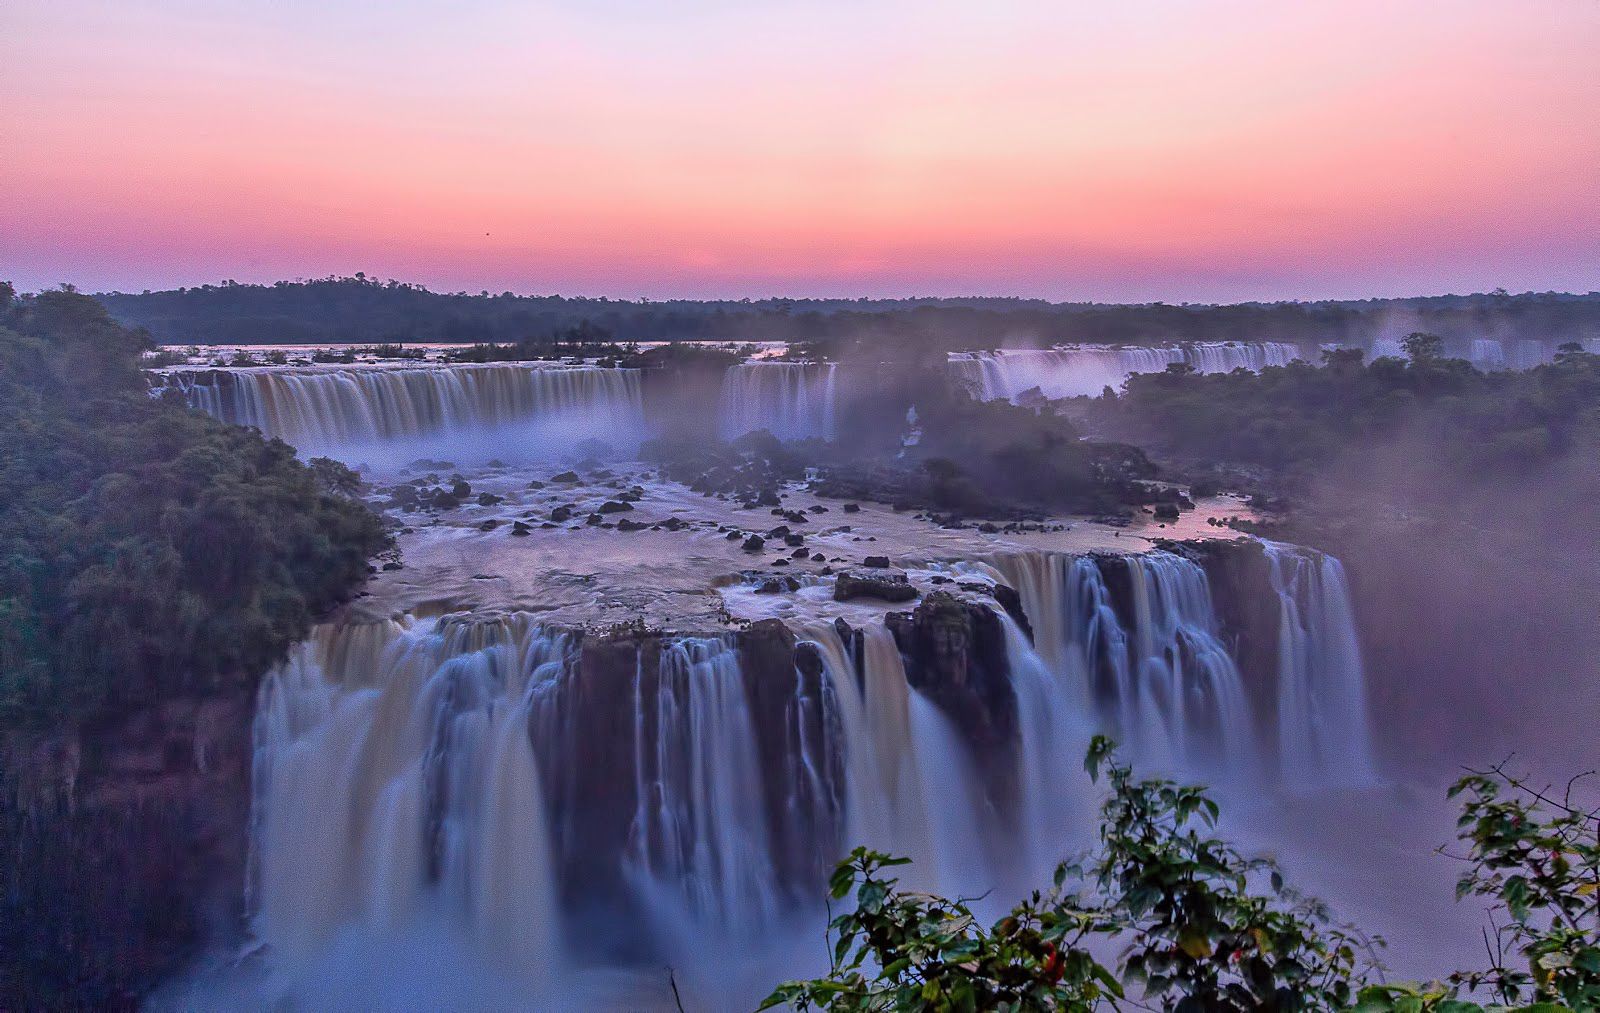 Iguazu Falls cascading into the Devil's Throat chasm, surrounded by lush rainforest.